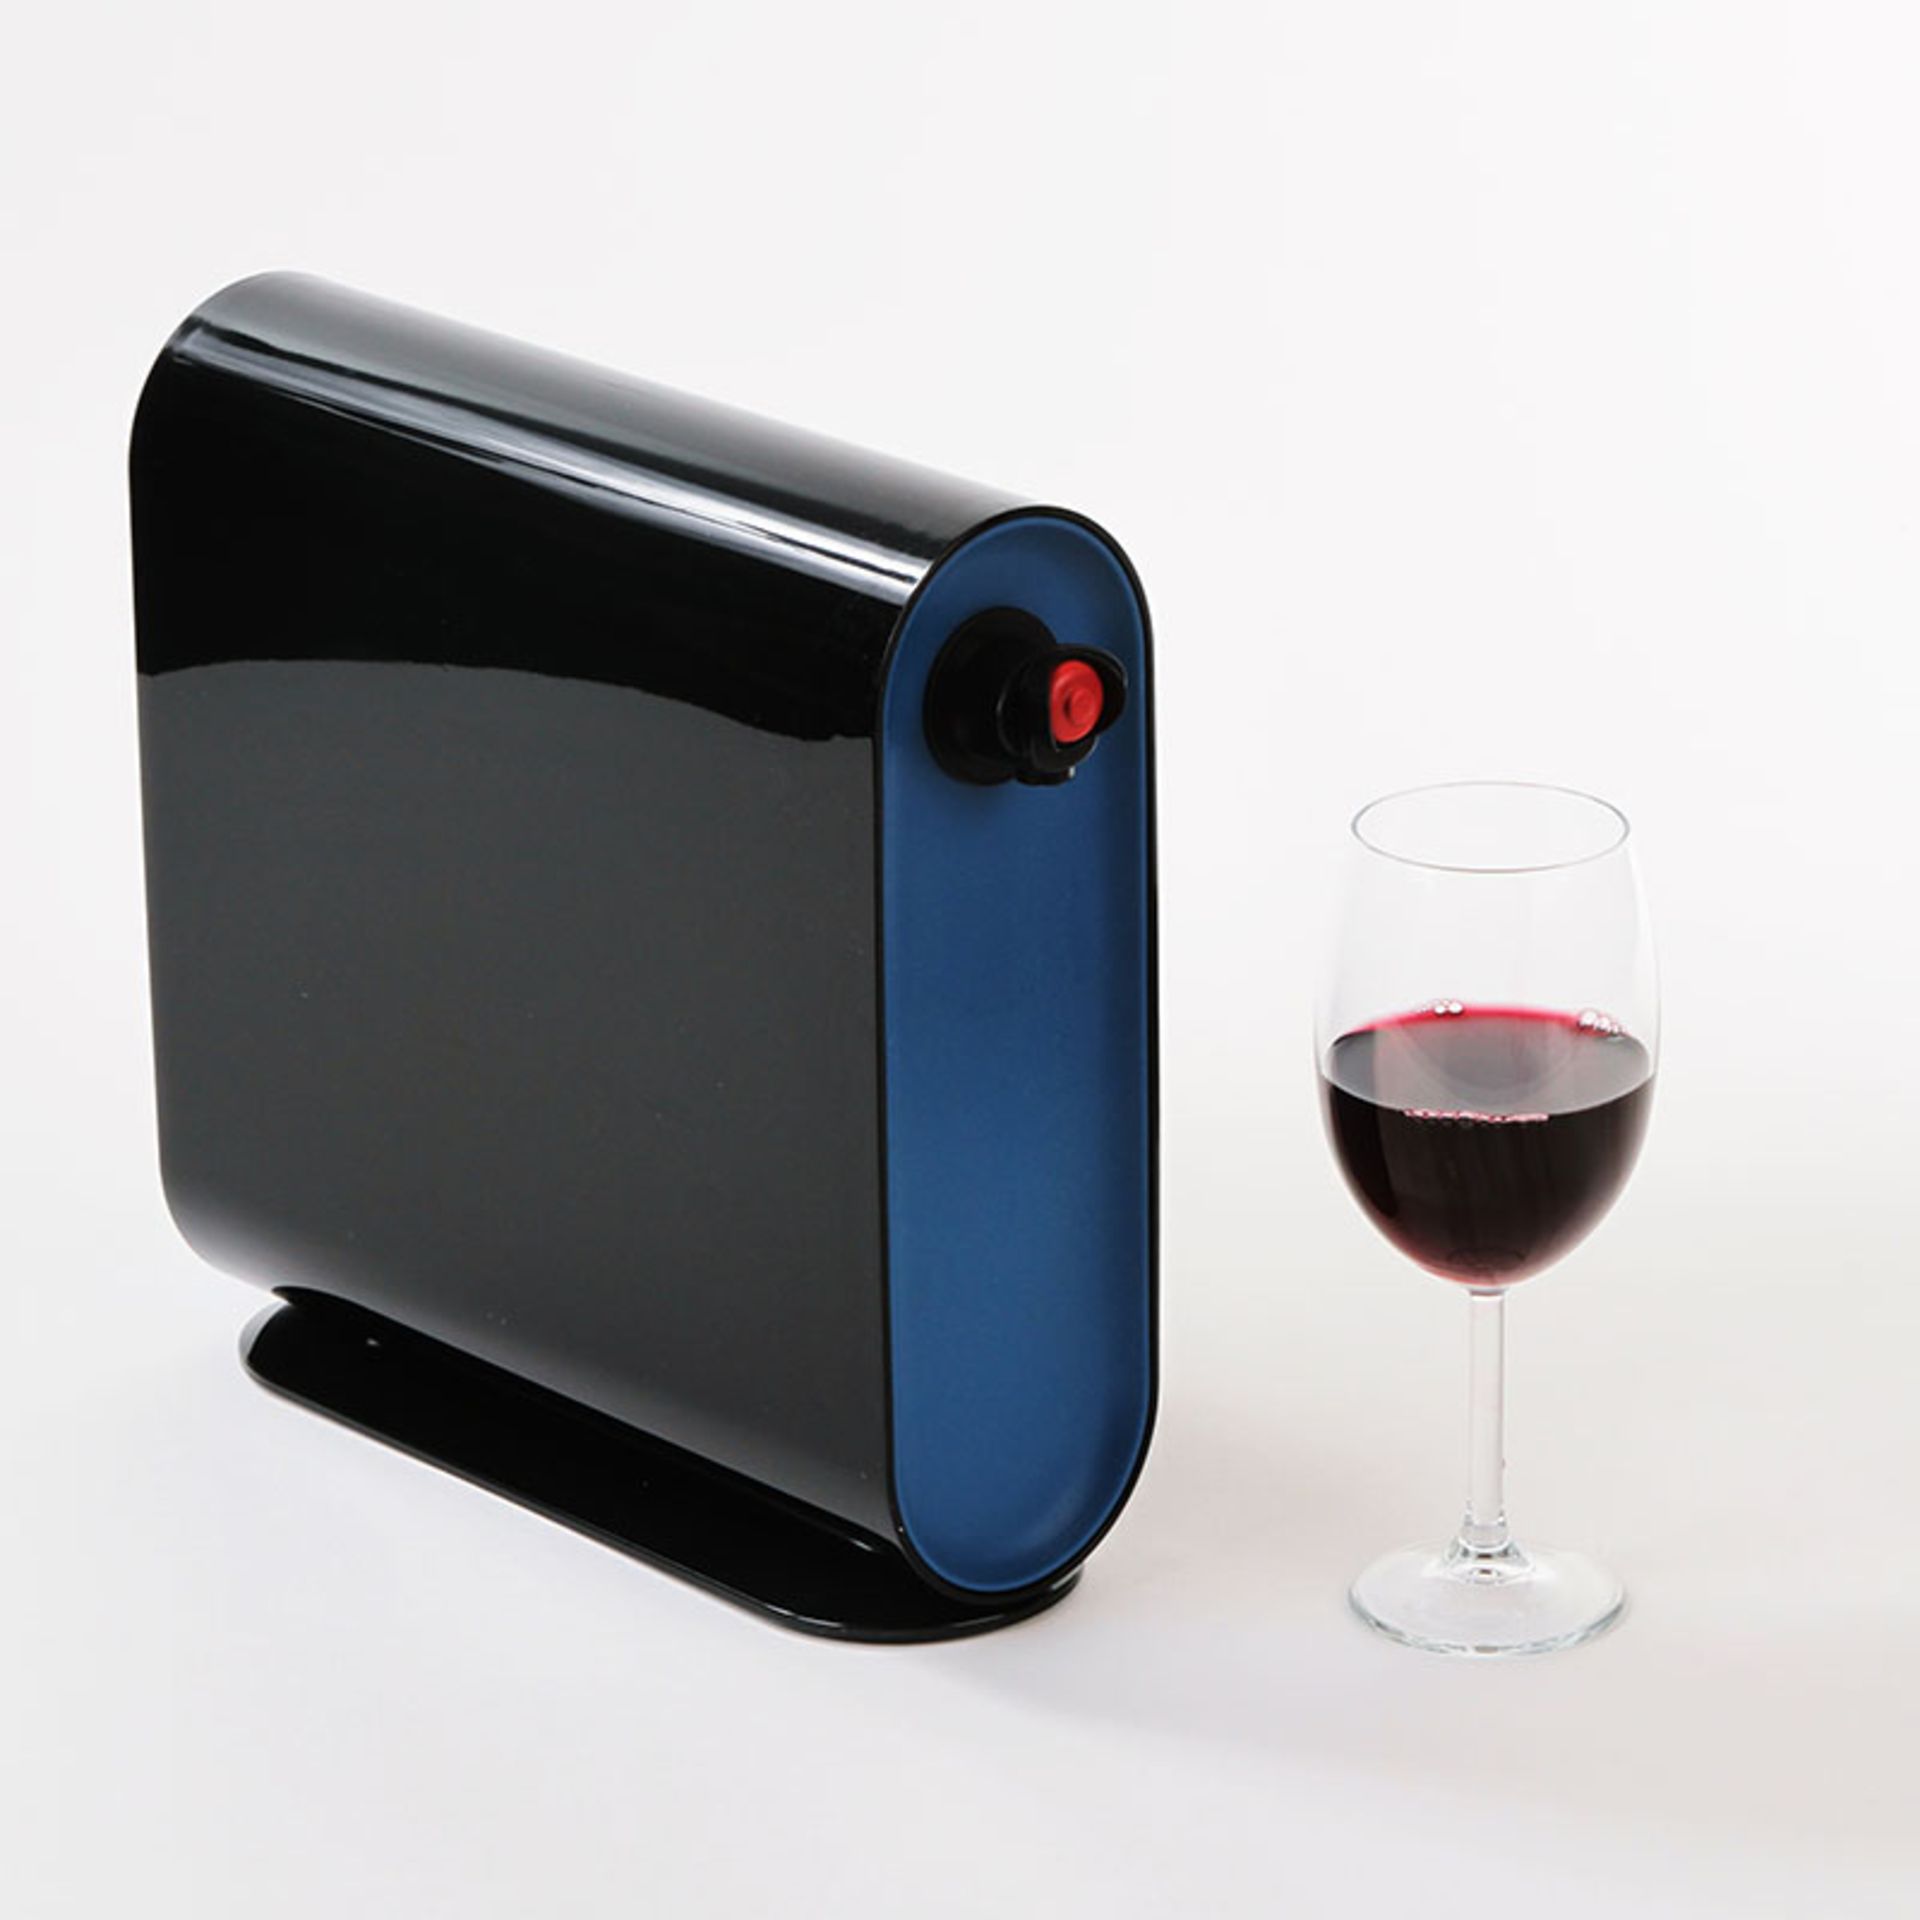 V Brand New Wine Plus Gravity Defying Wine Server - Simply Place Wine Bag Into Server To Easily Pour